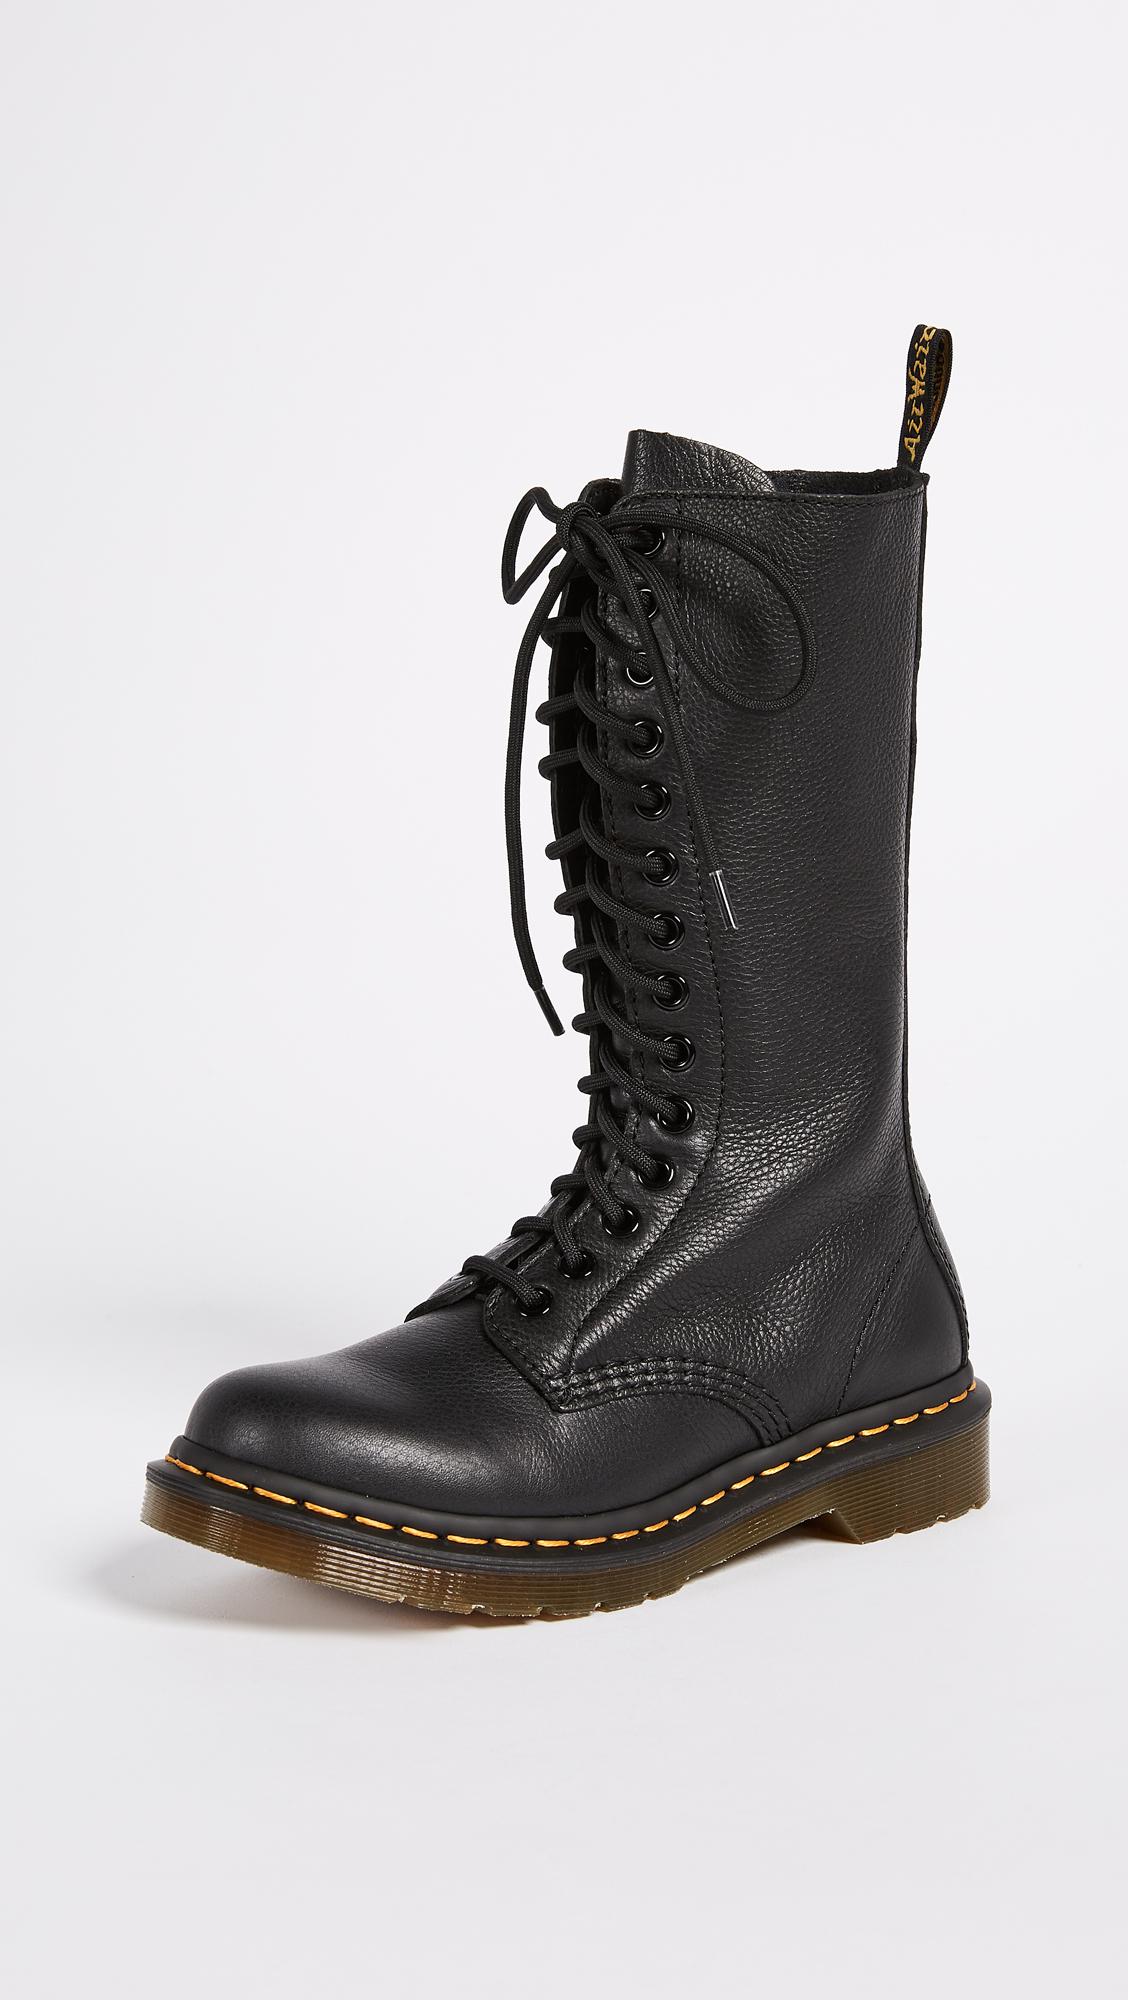 Dr. Martens Leather 1b99 14 Eye Zip Boots in Black | Lyst